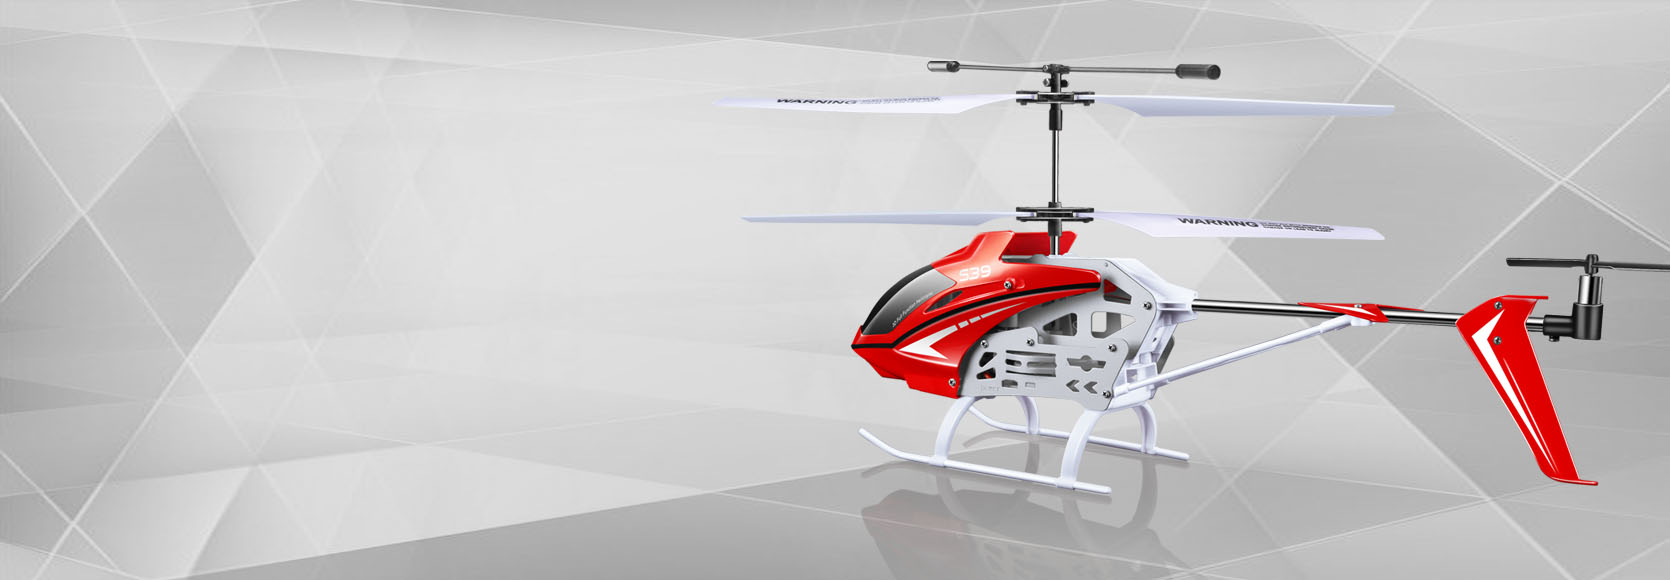 s39 helicopter